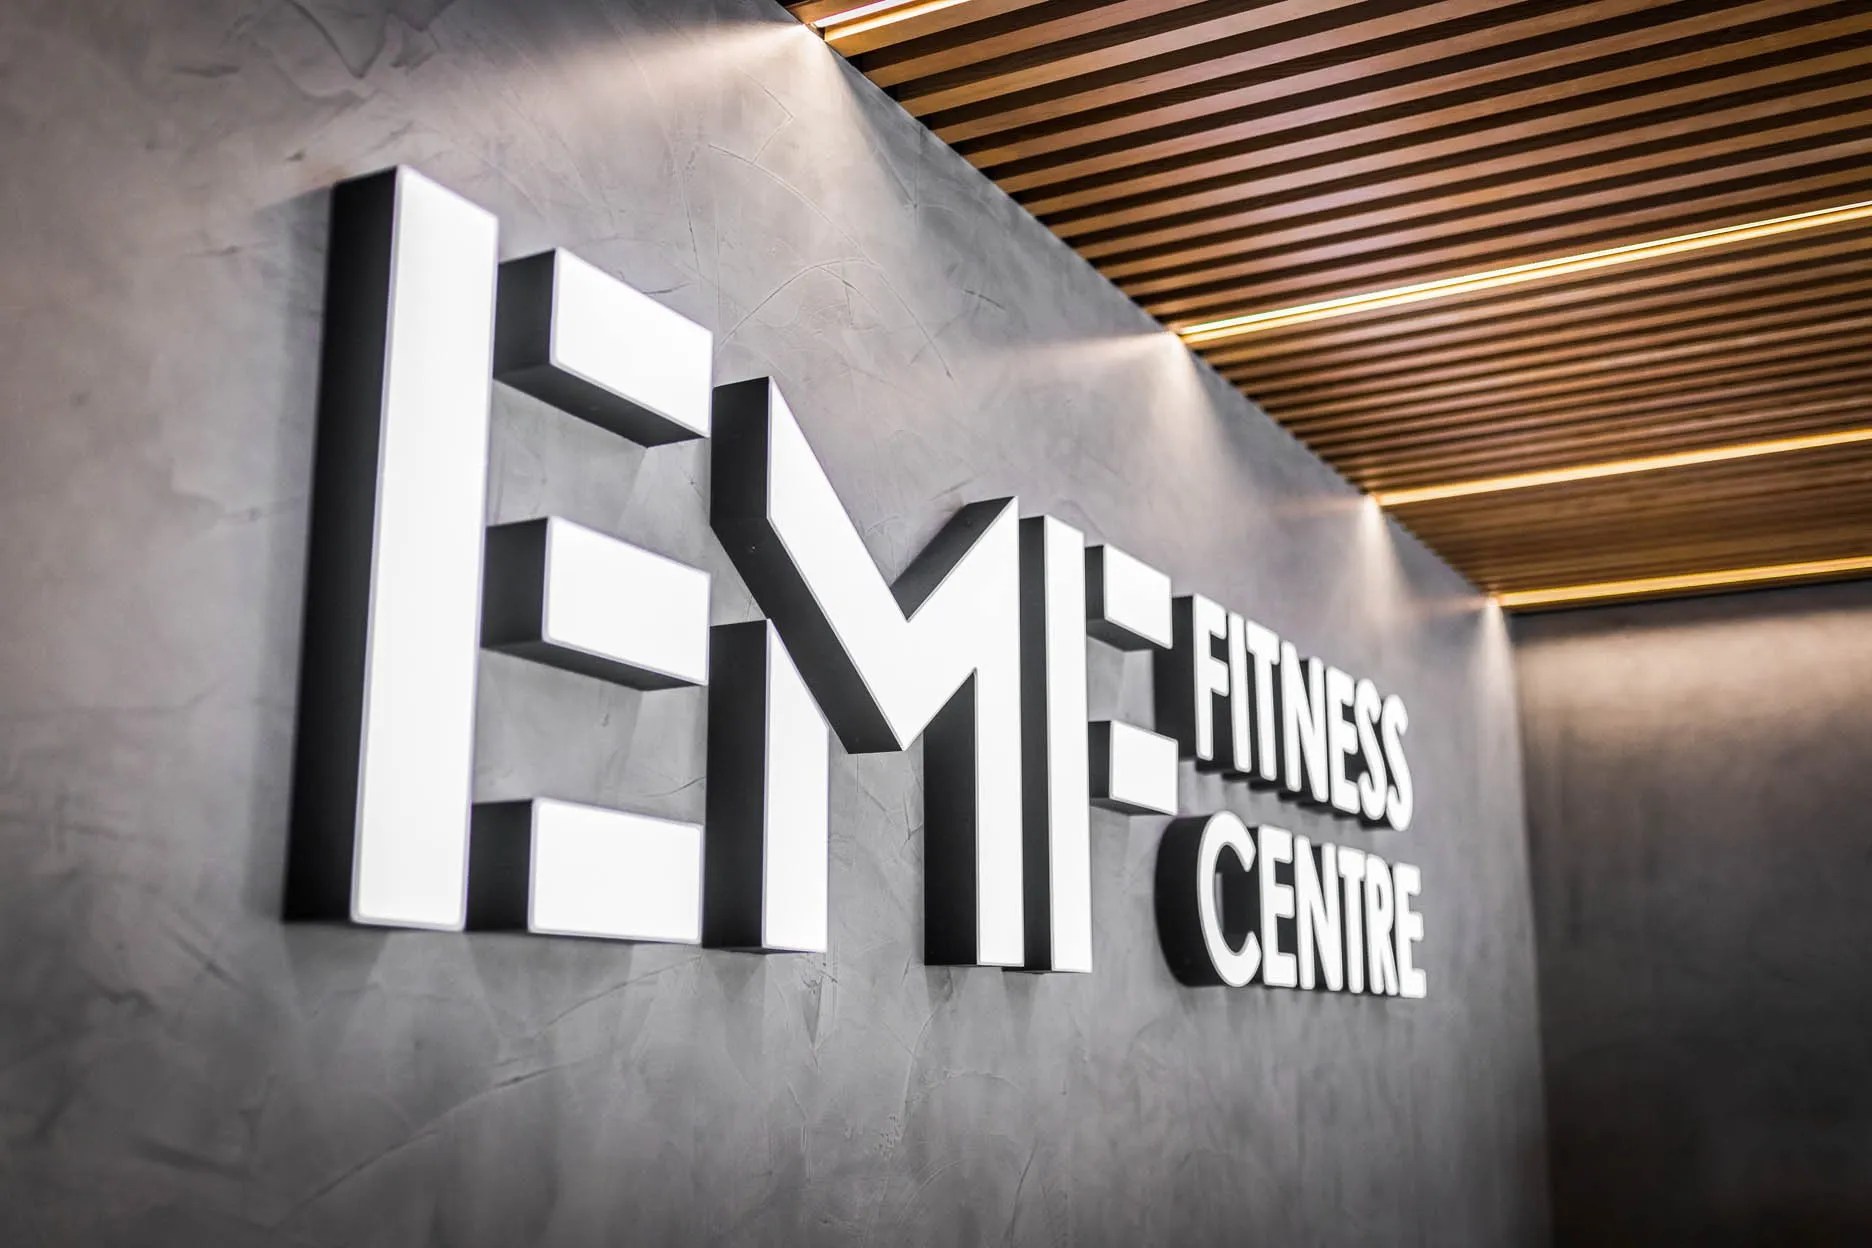 Emf fitness centre logo featuring a vibrant commercial painting design.